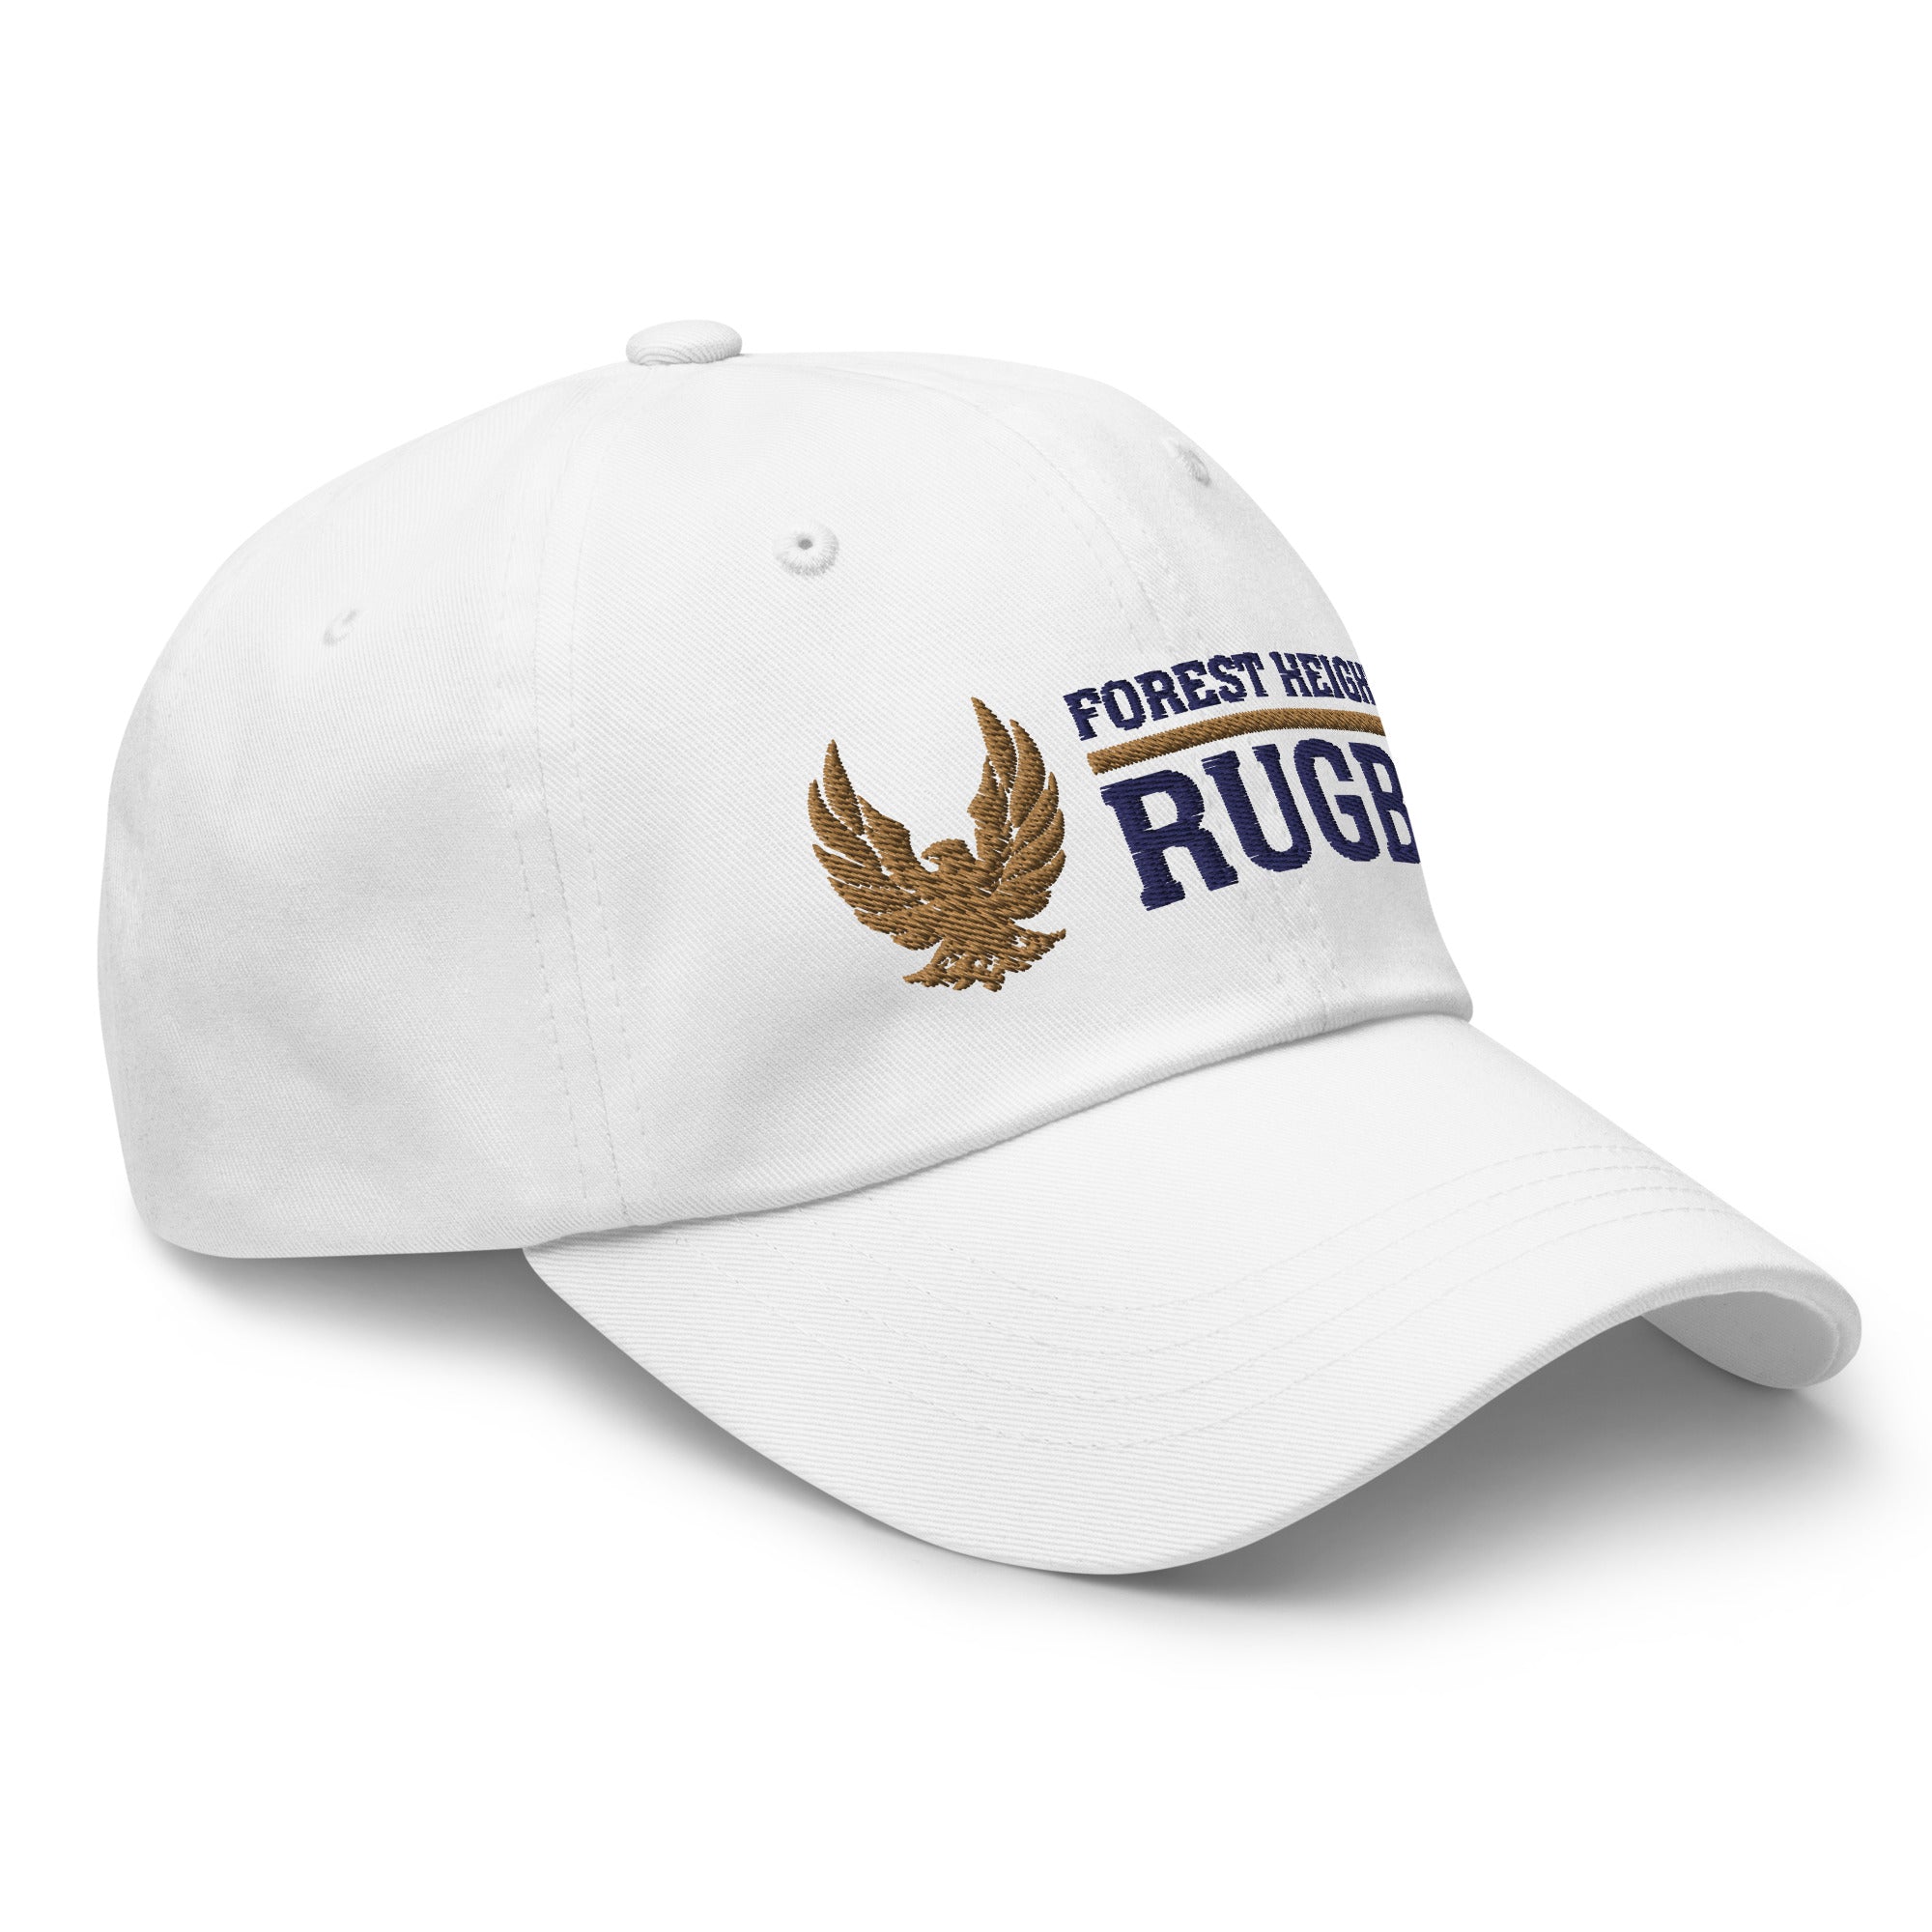 Rugby Imports GHFH Rugby Adjustable Hat